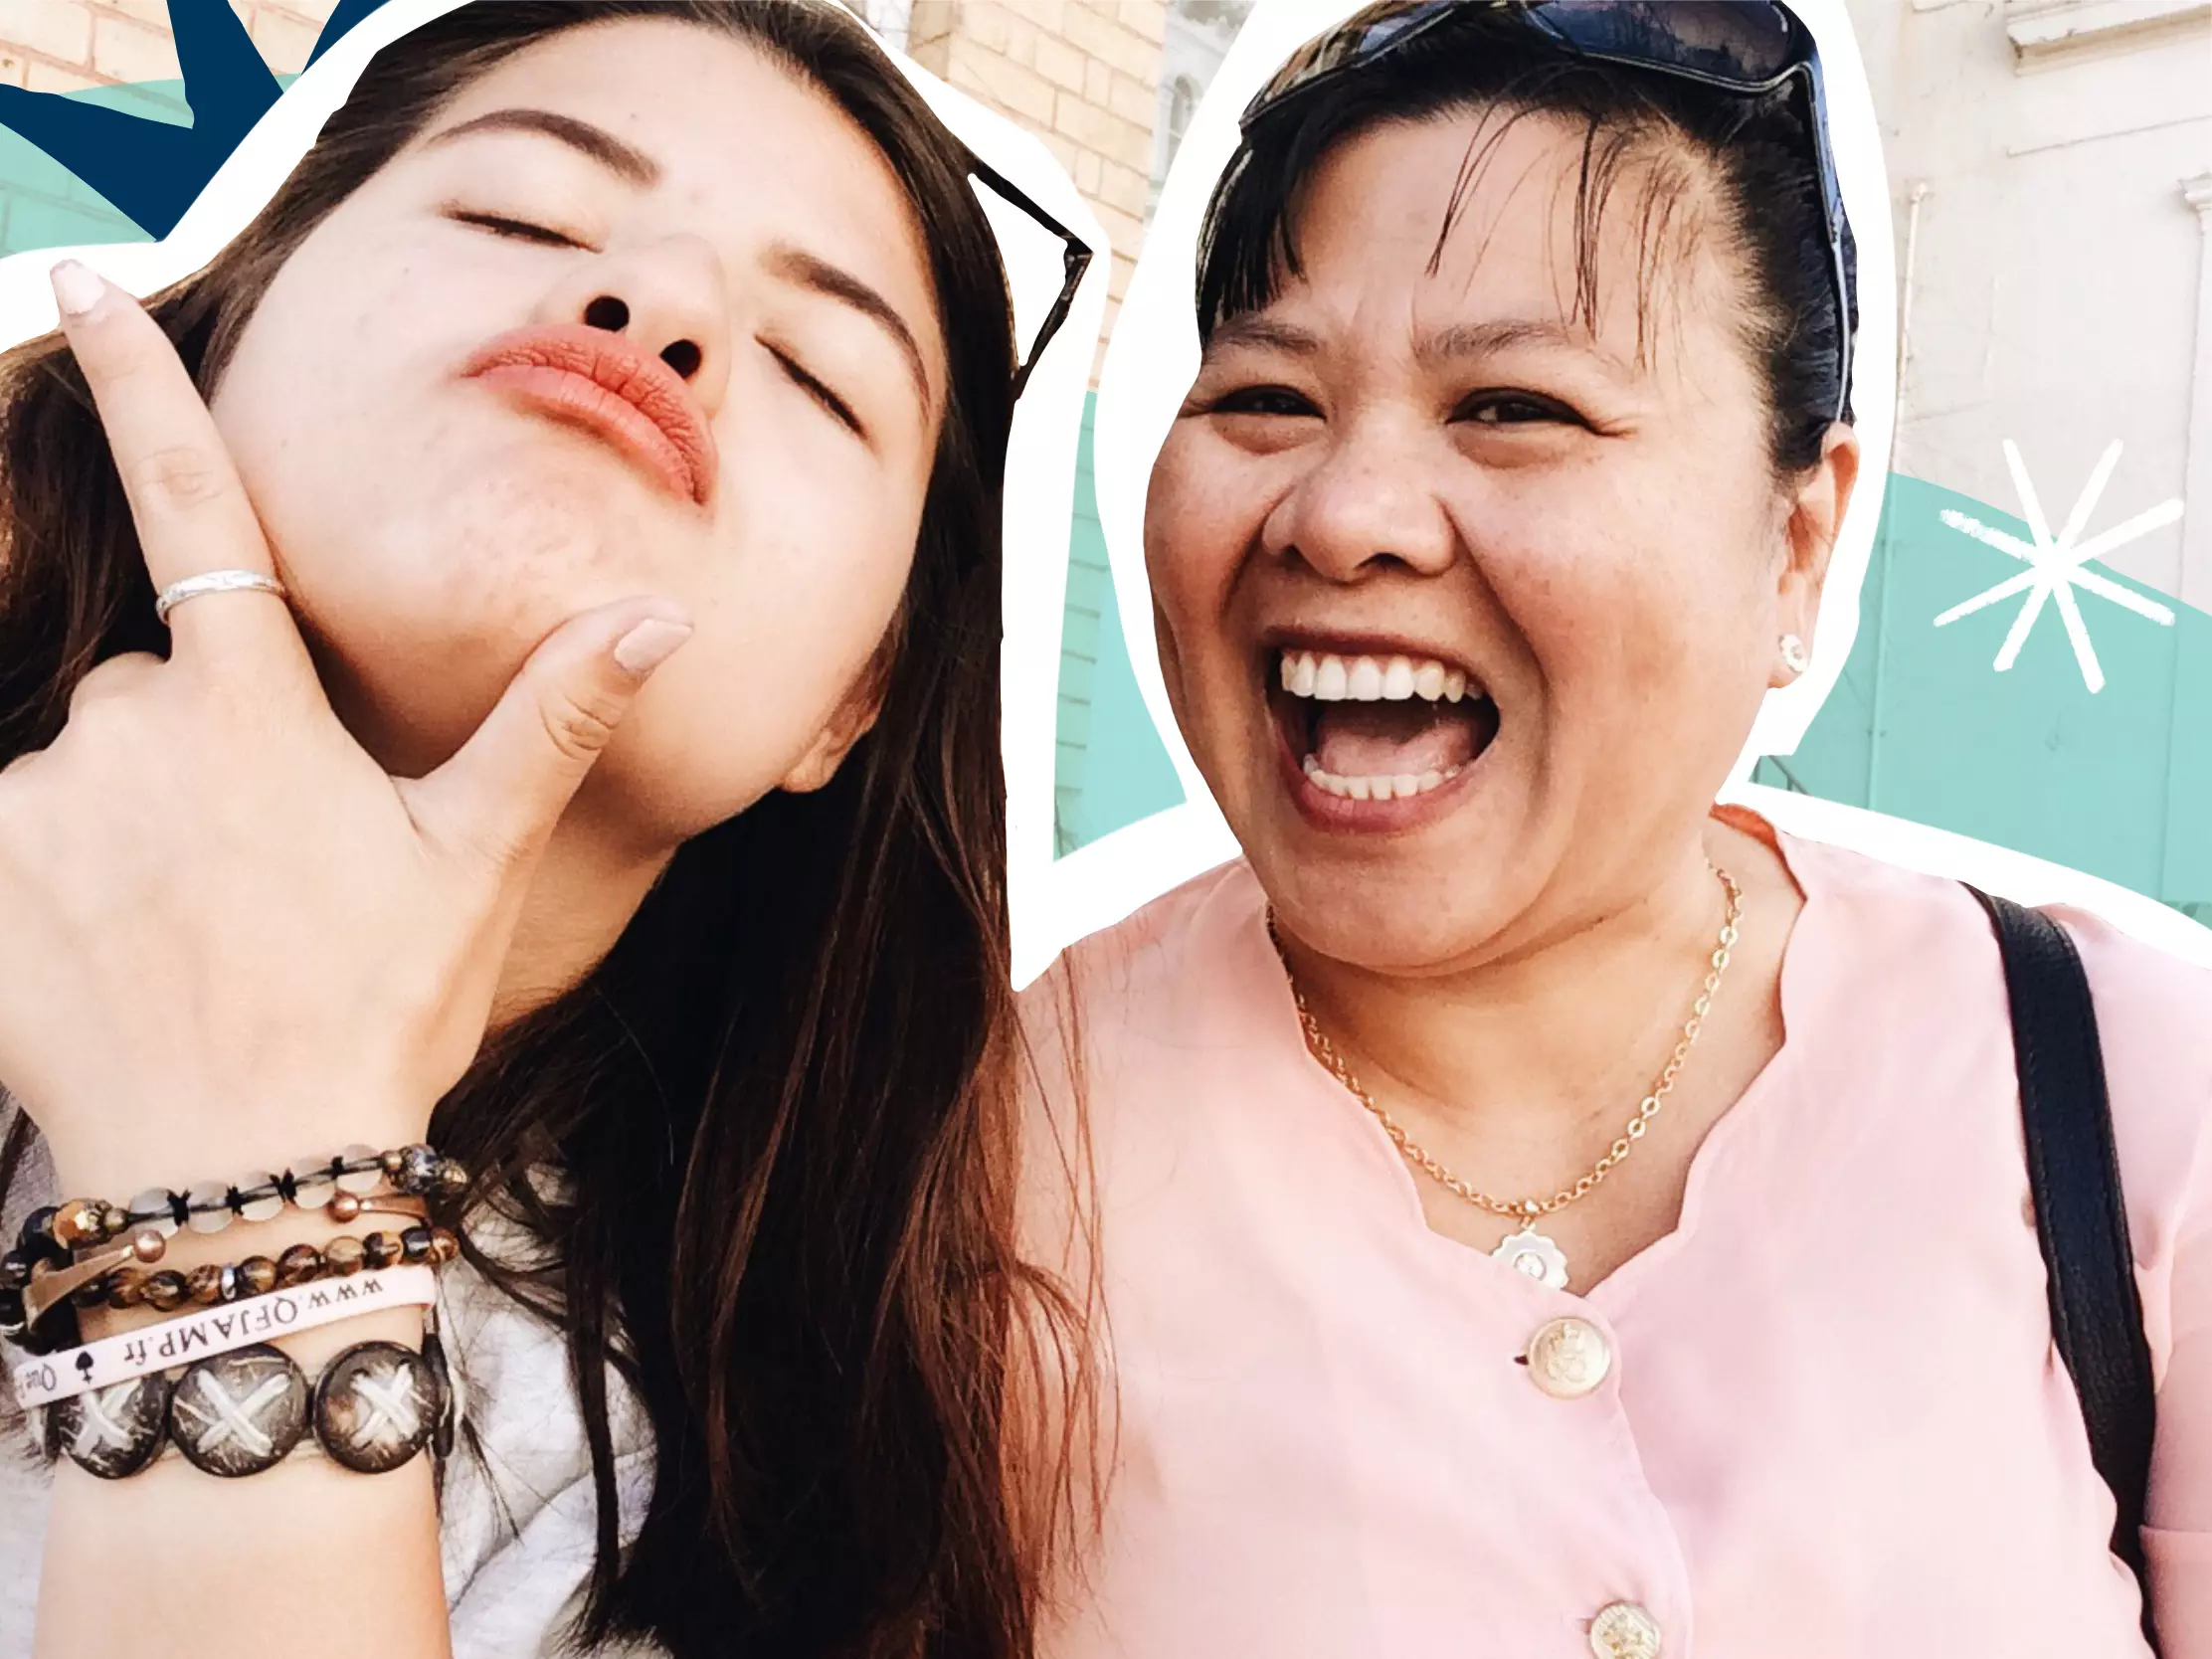 Mother and daughter take a selfie. Daughter boasts duck lips and mother grins with open mouth smile